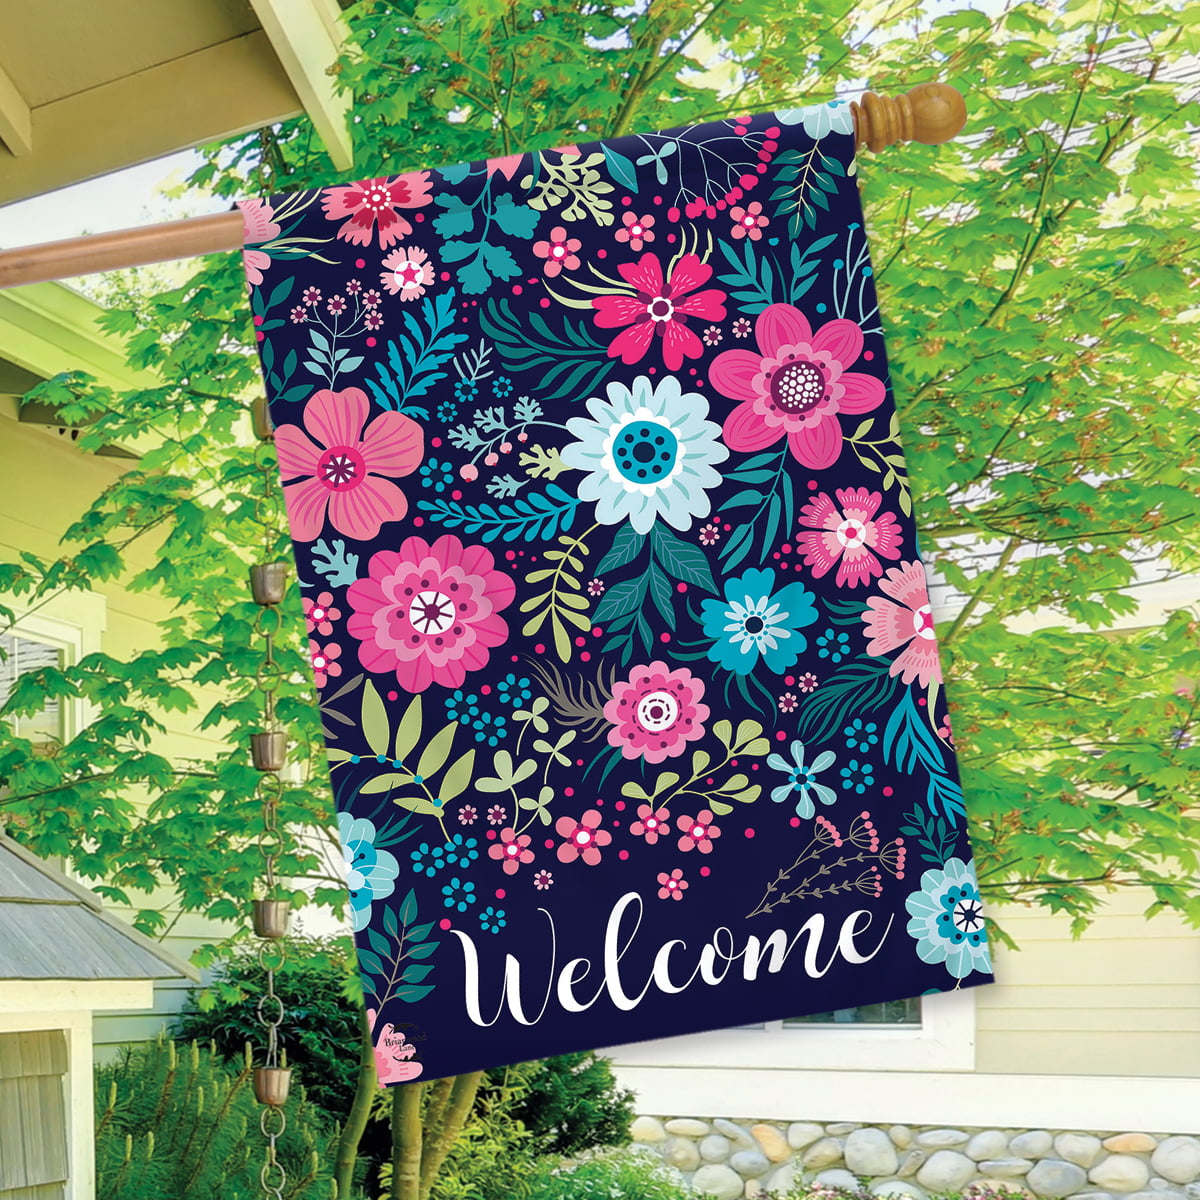 Briarwood Lane Spread Sunshine to Others Spring House Flag Floral Inspirational 28 x 40 